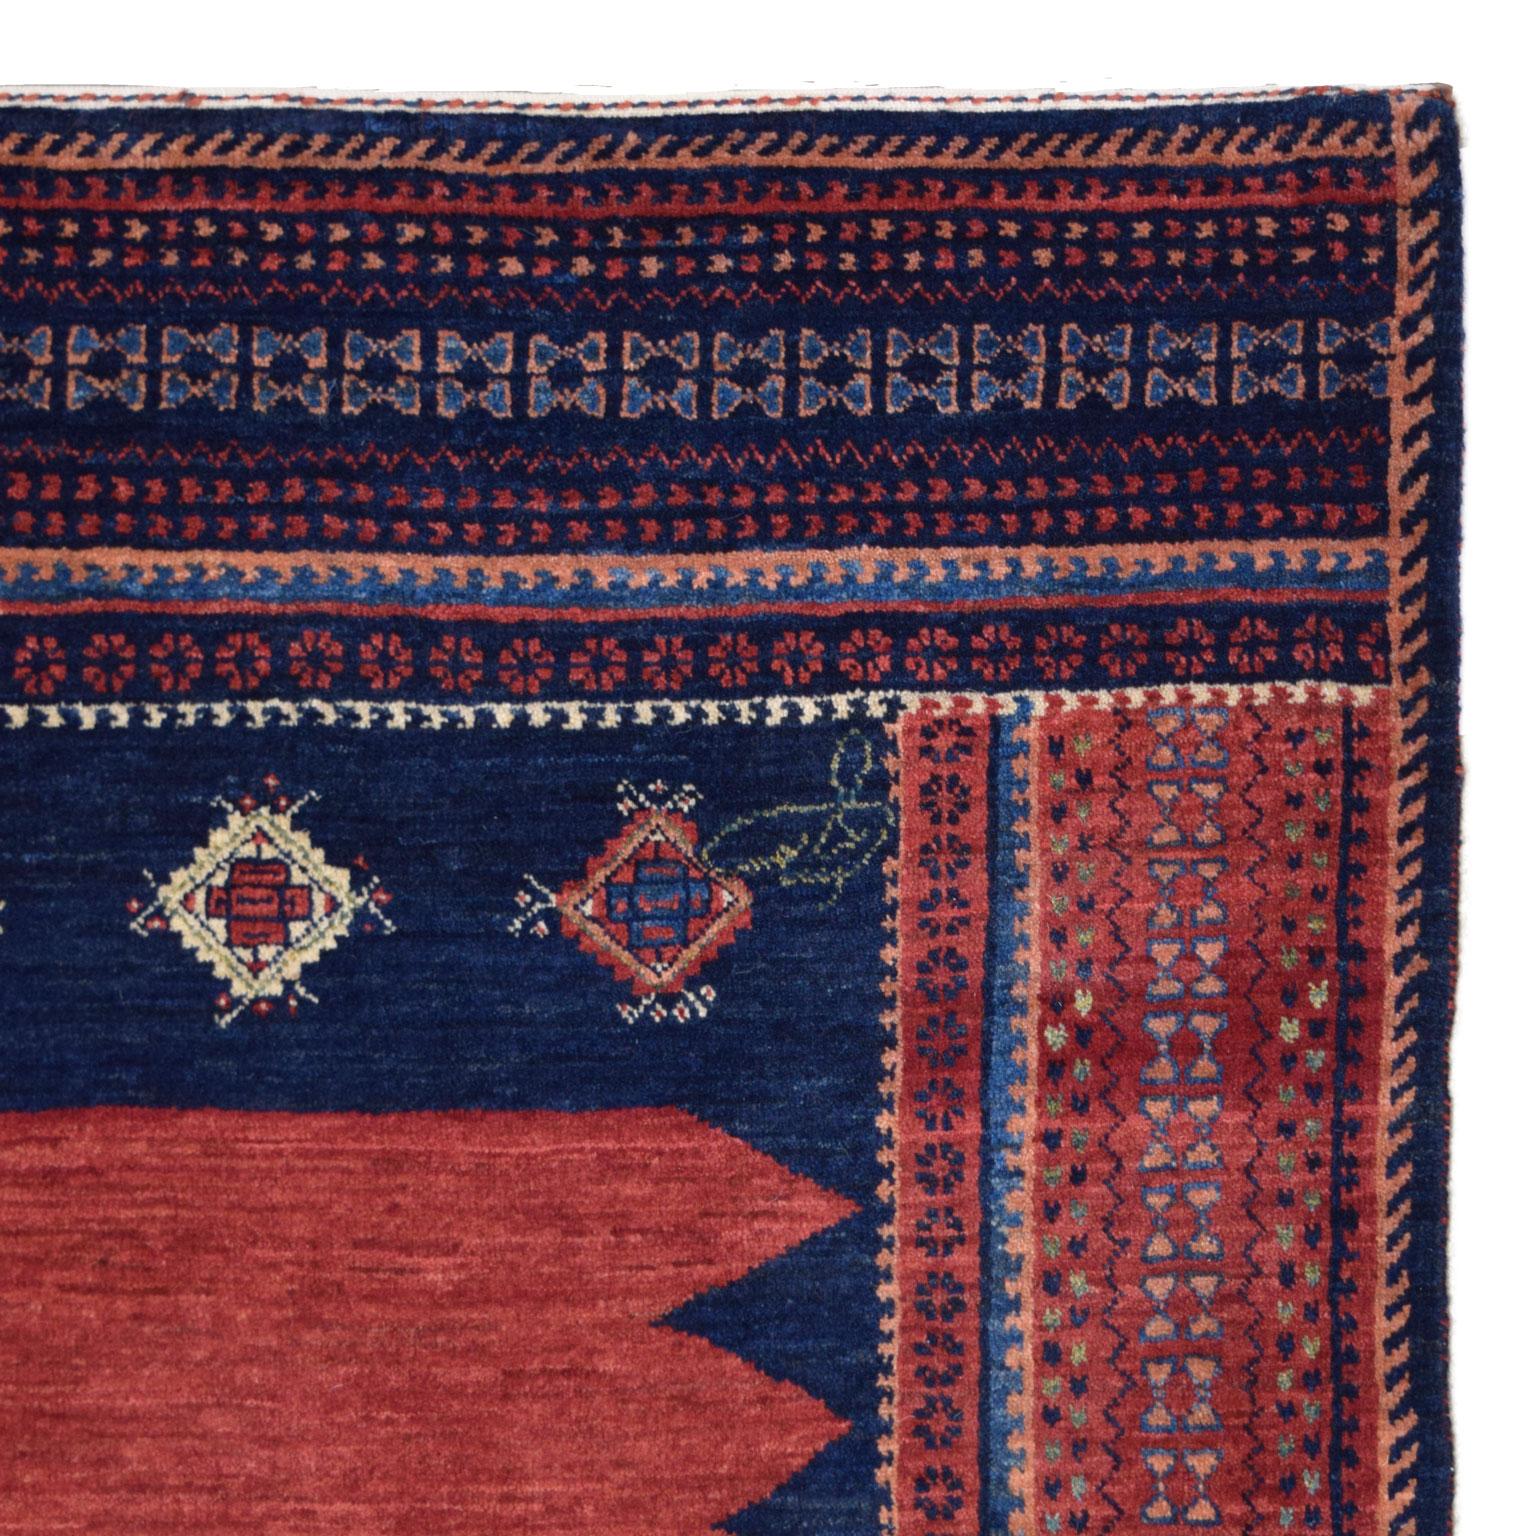 Hand-Knotted Wool Persian Qashqai Tribal Rug, Red, Green, Indigo, Cream, 4’ x 6’ For Sale 1